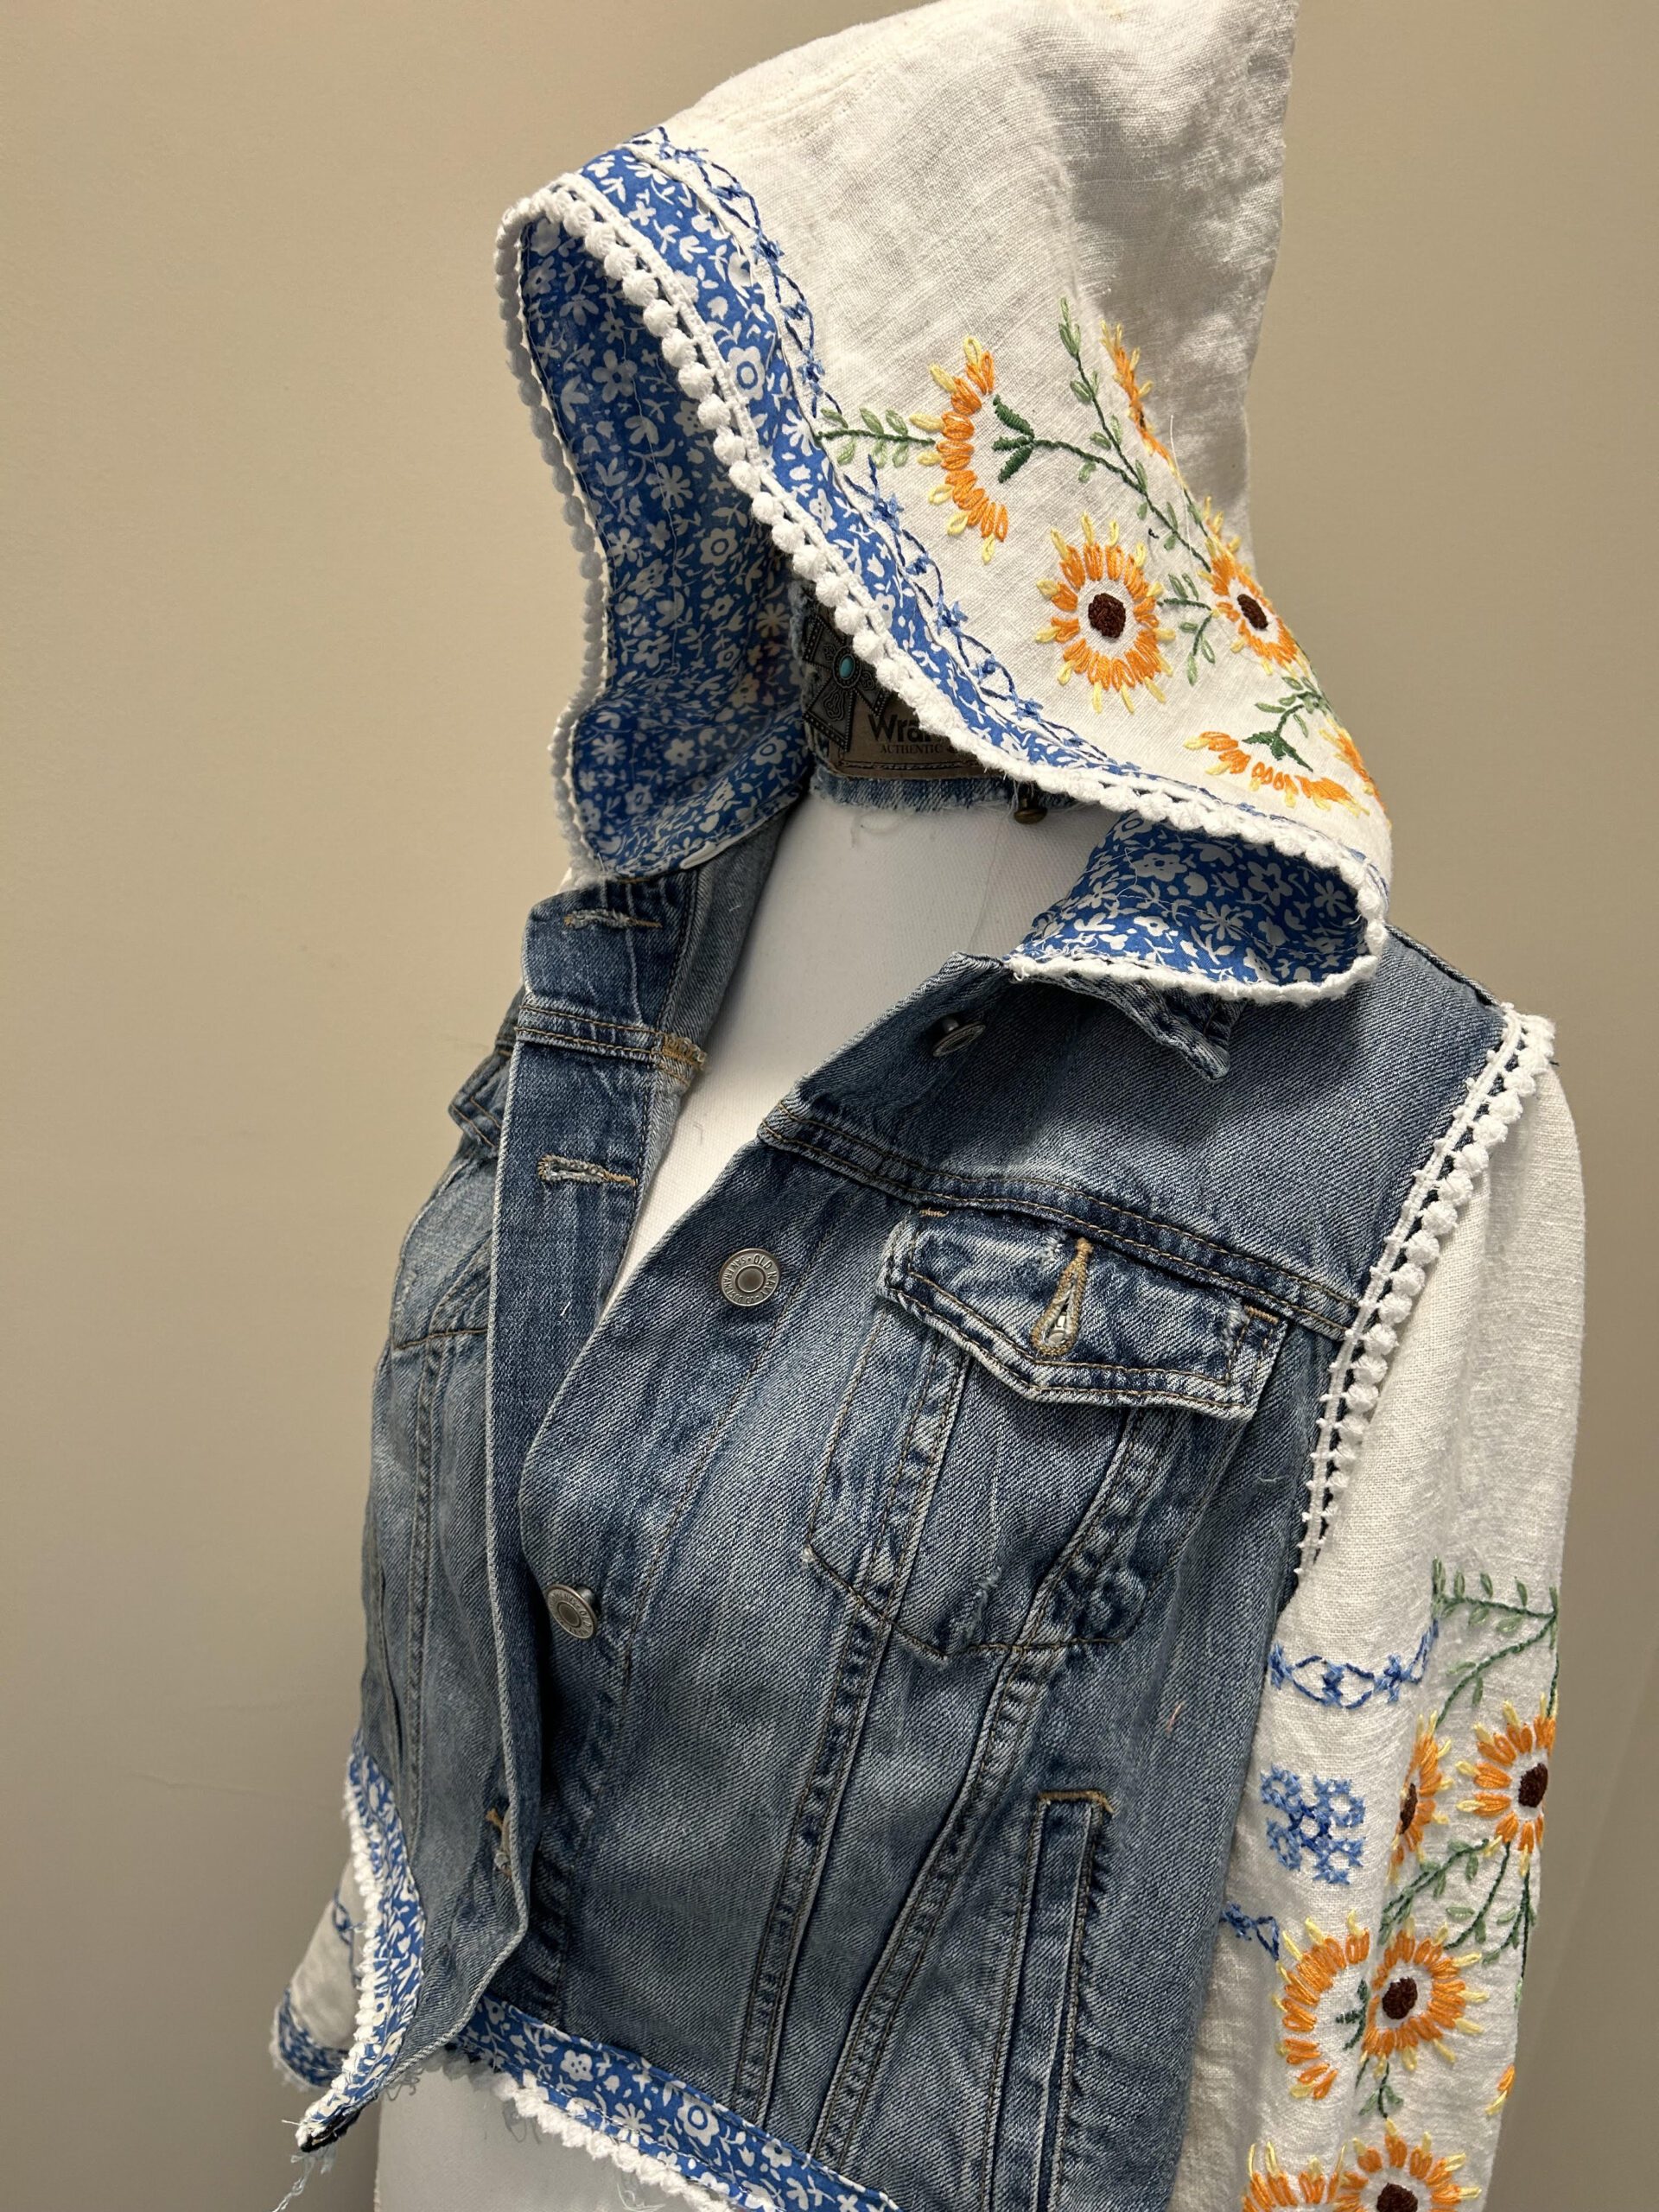 A mannequin with a denim jacket and hoodie.